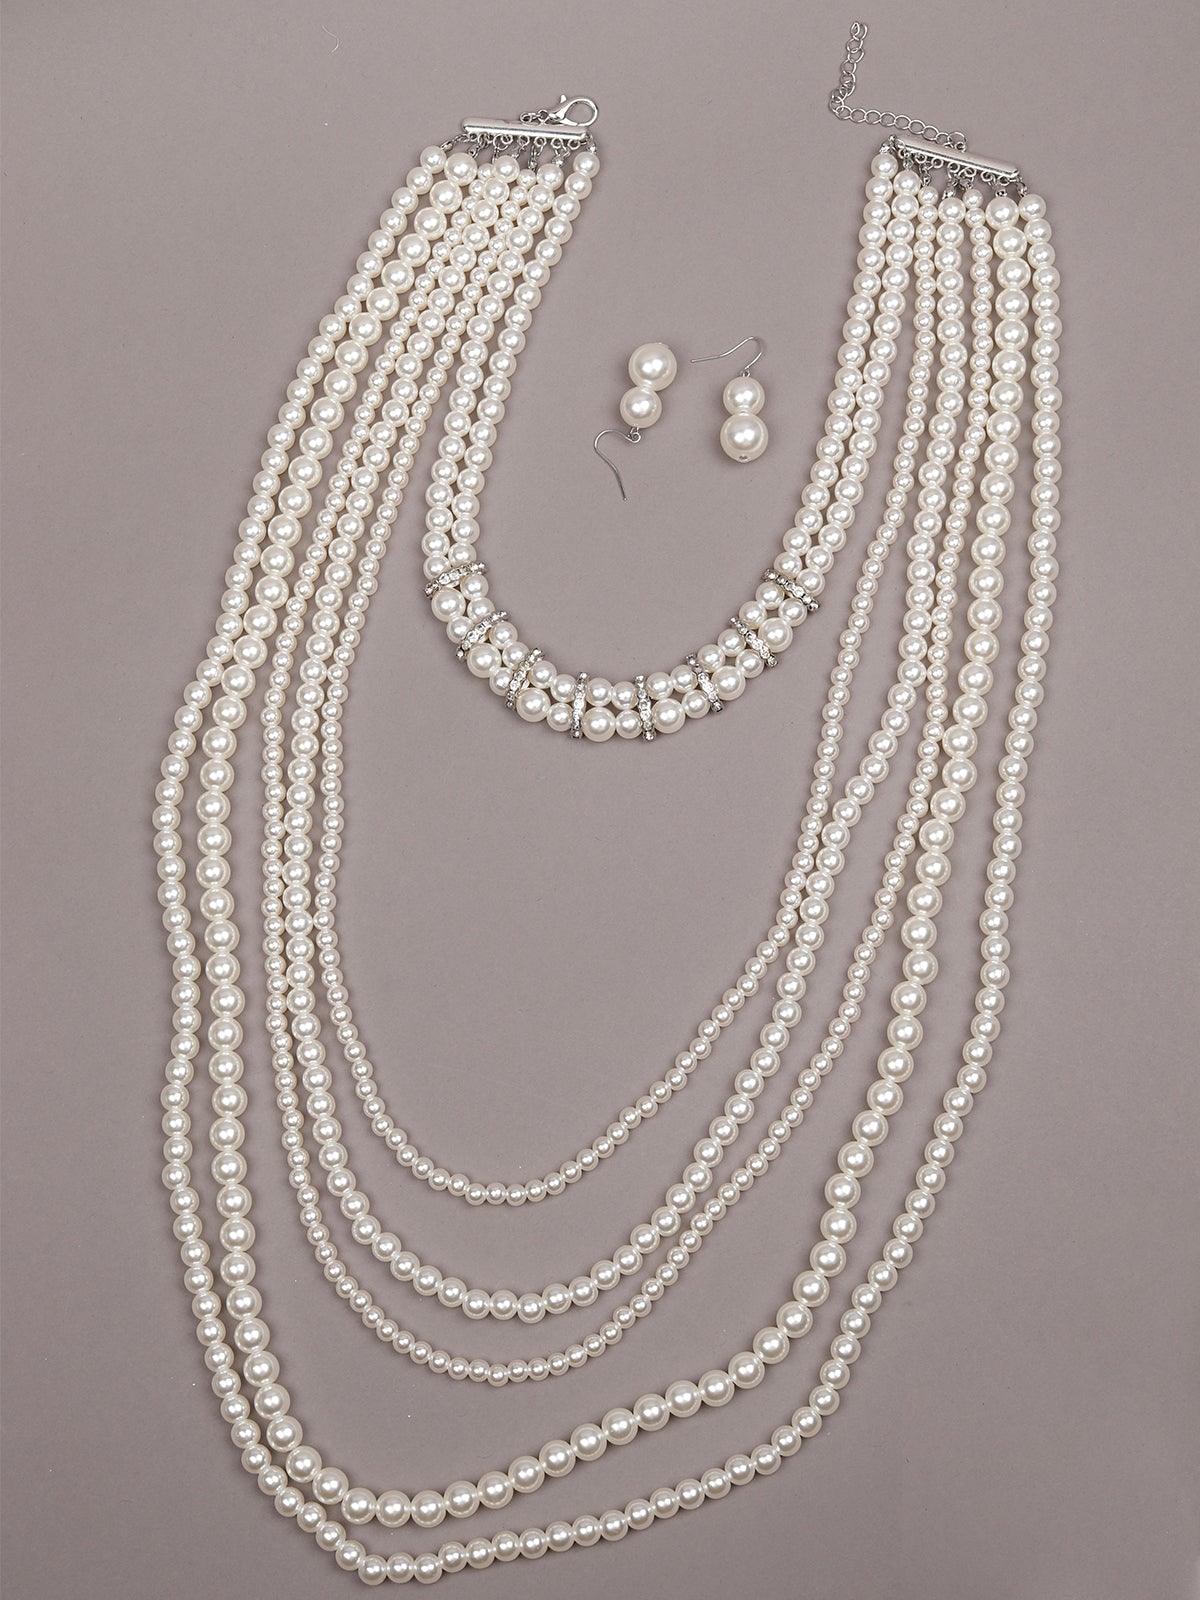 Exquisite Long Overlapping Pearl Necklace - Odette